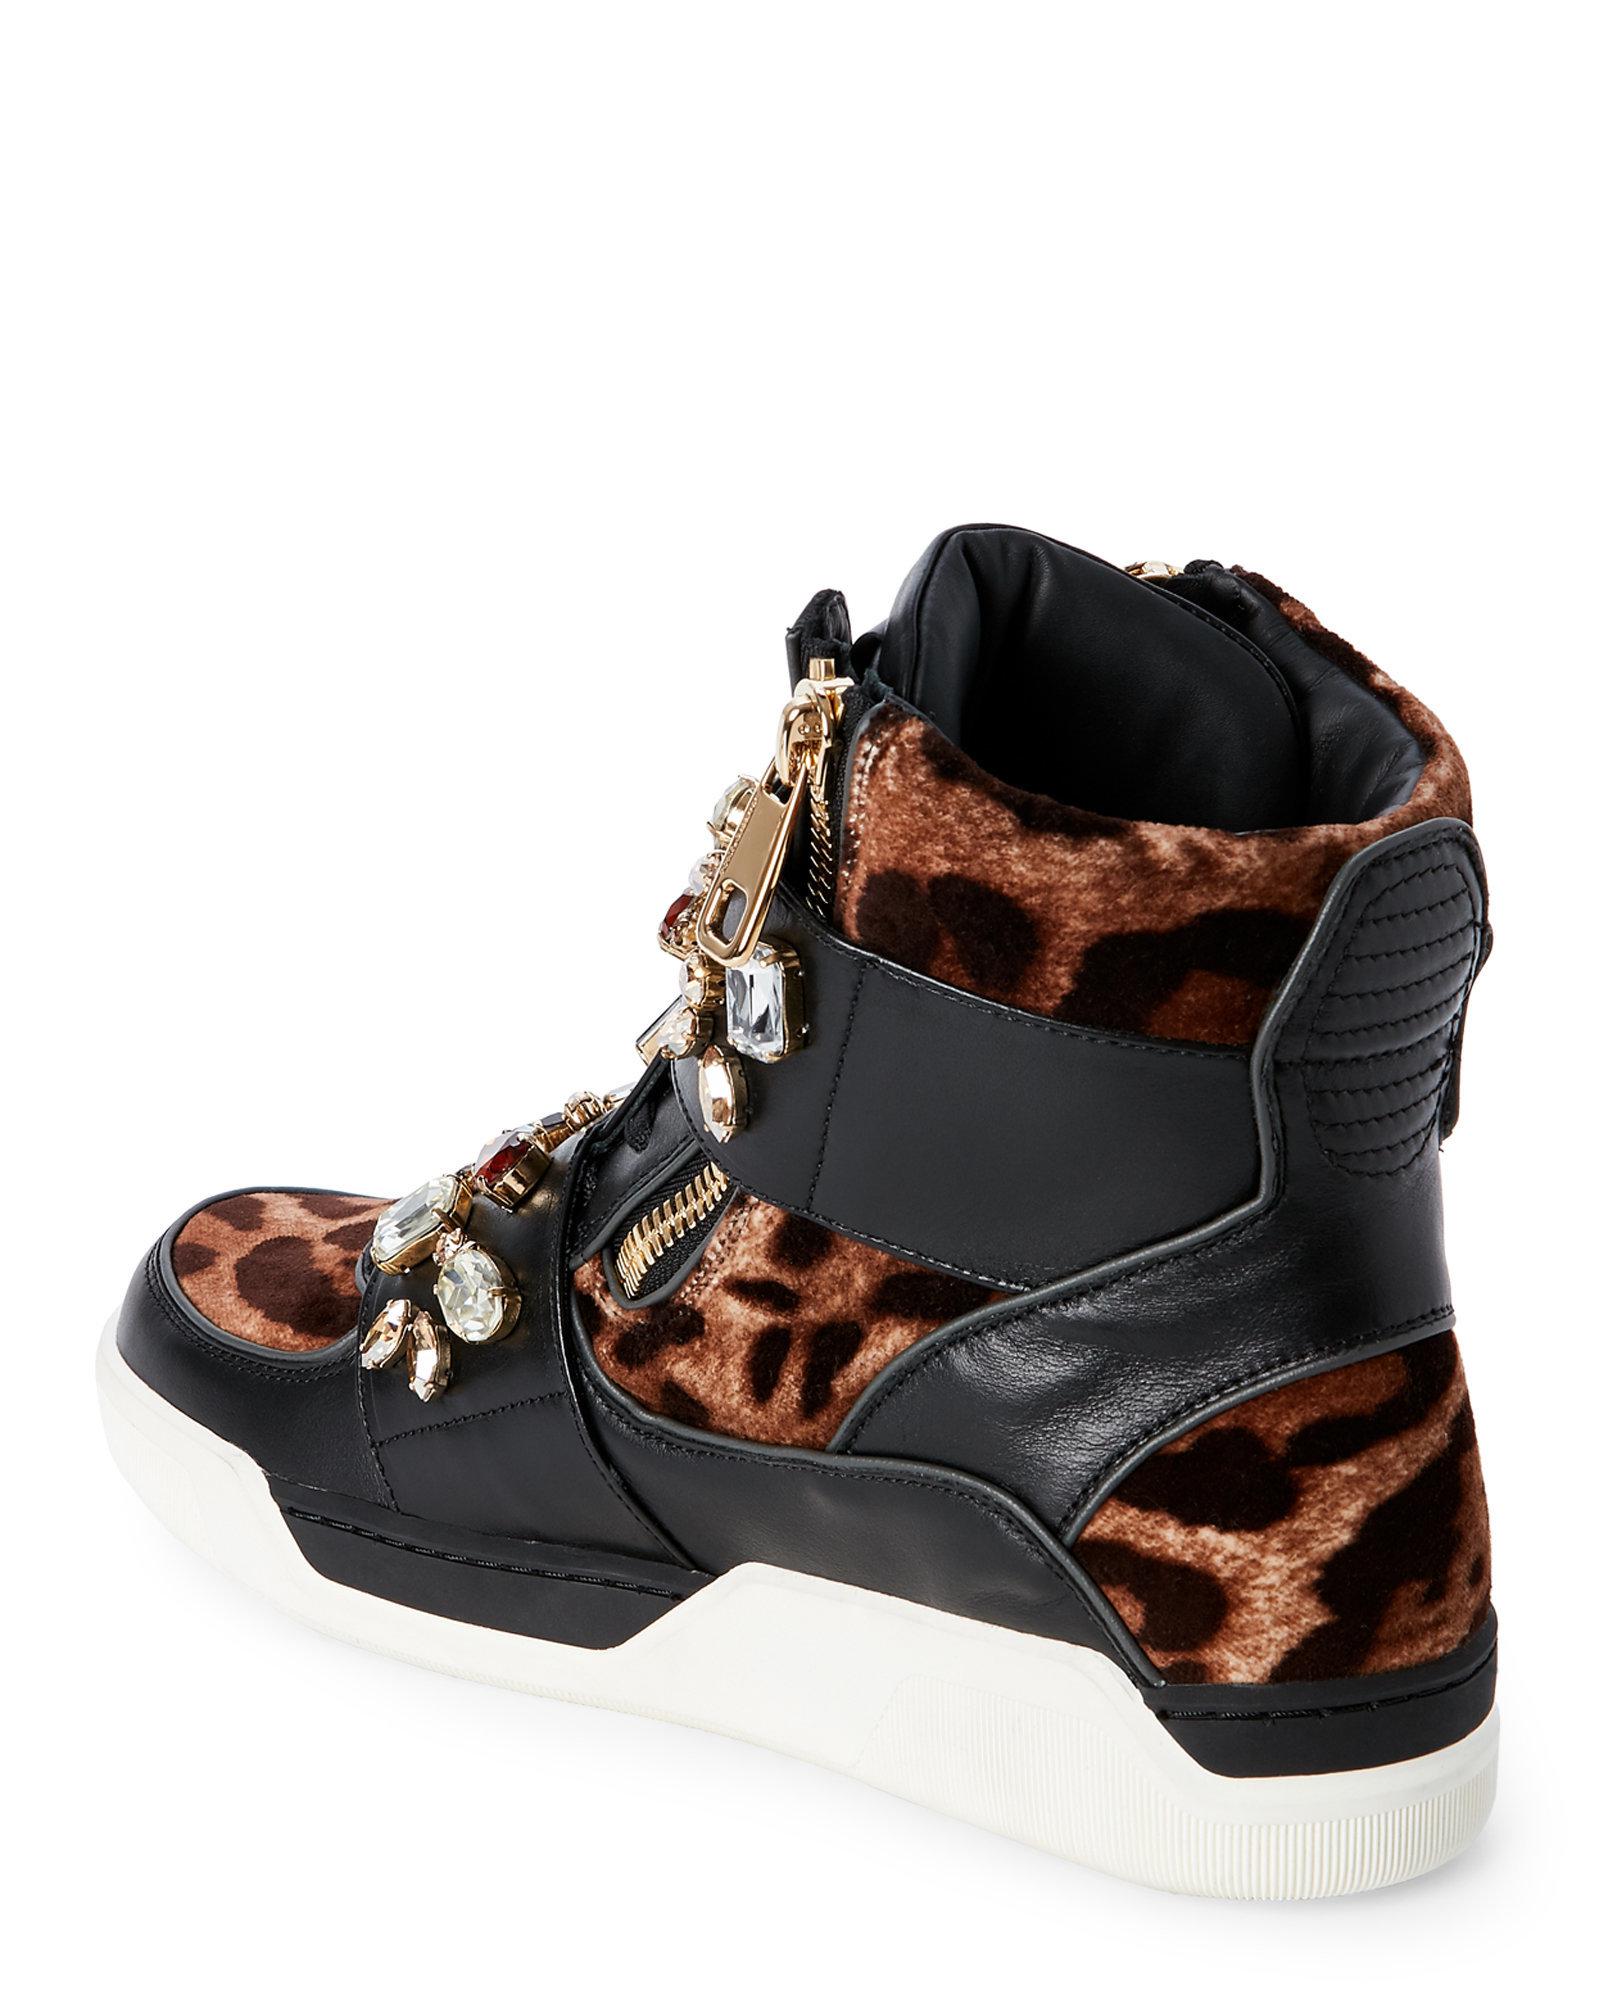 Dolce & Gabbana Leather Leopard & Black Jeweled High Top Sneakers - Lyst